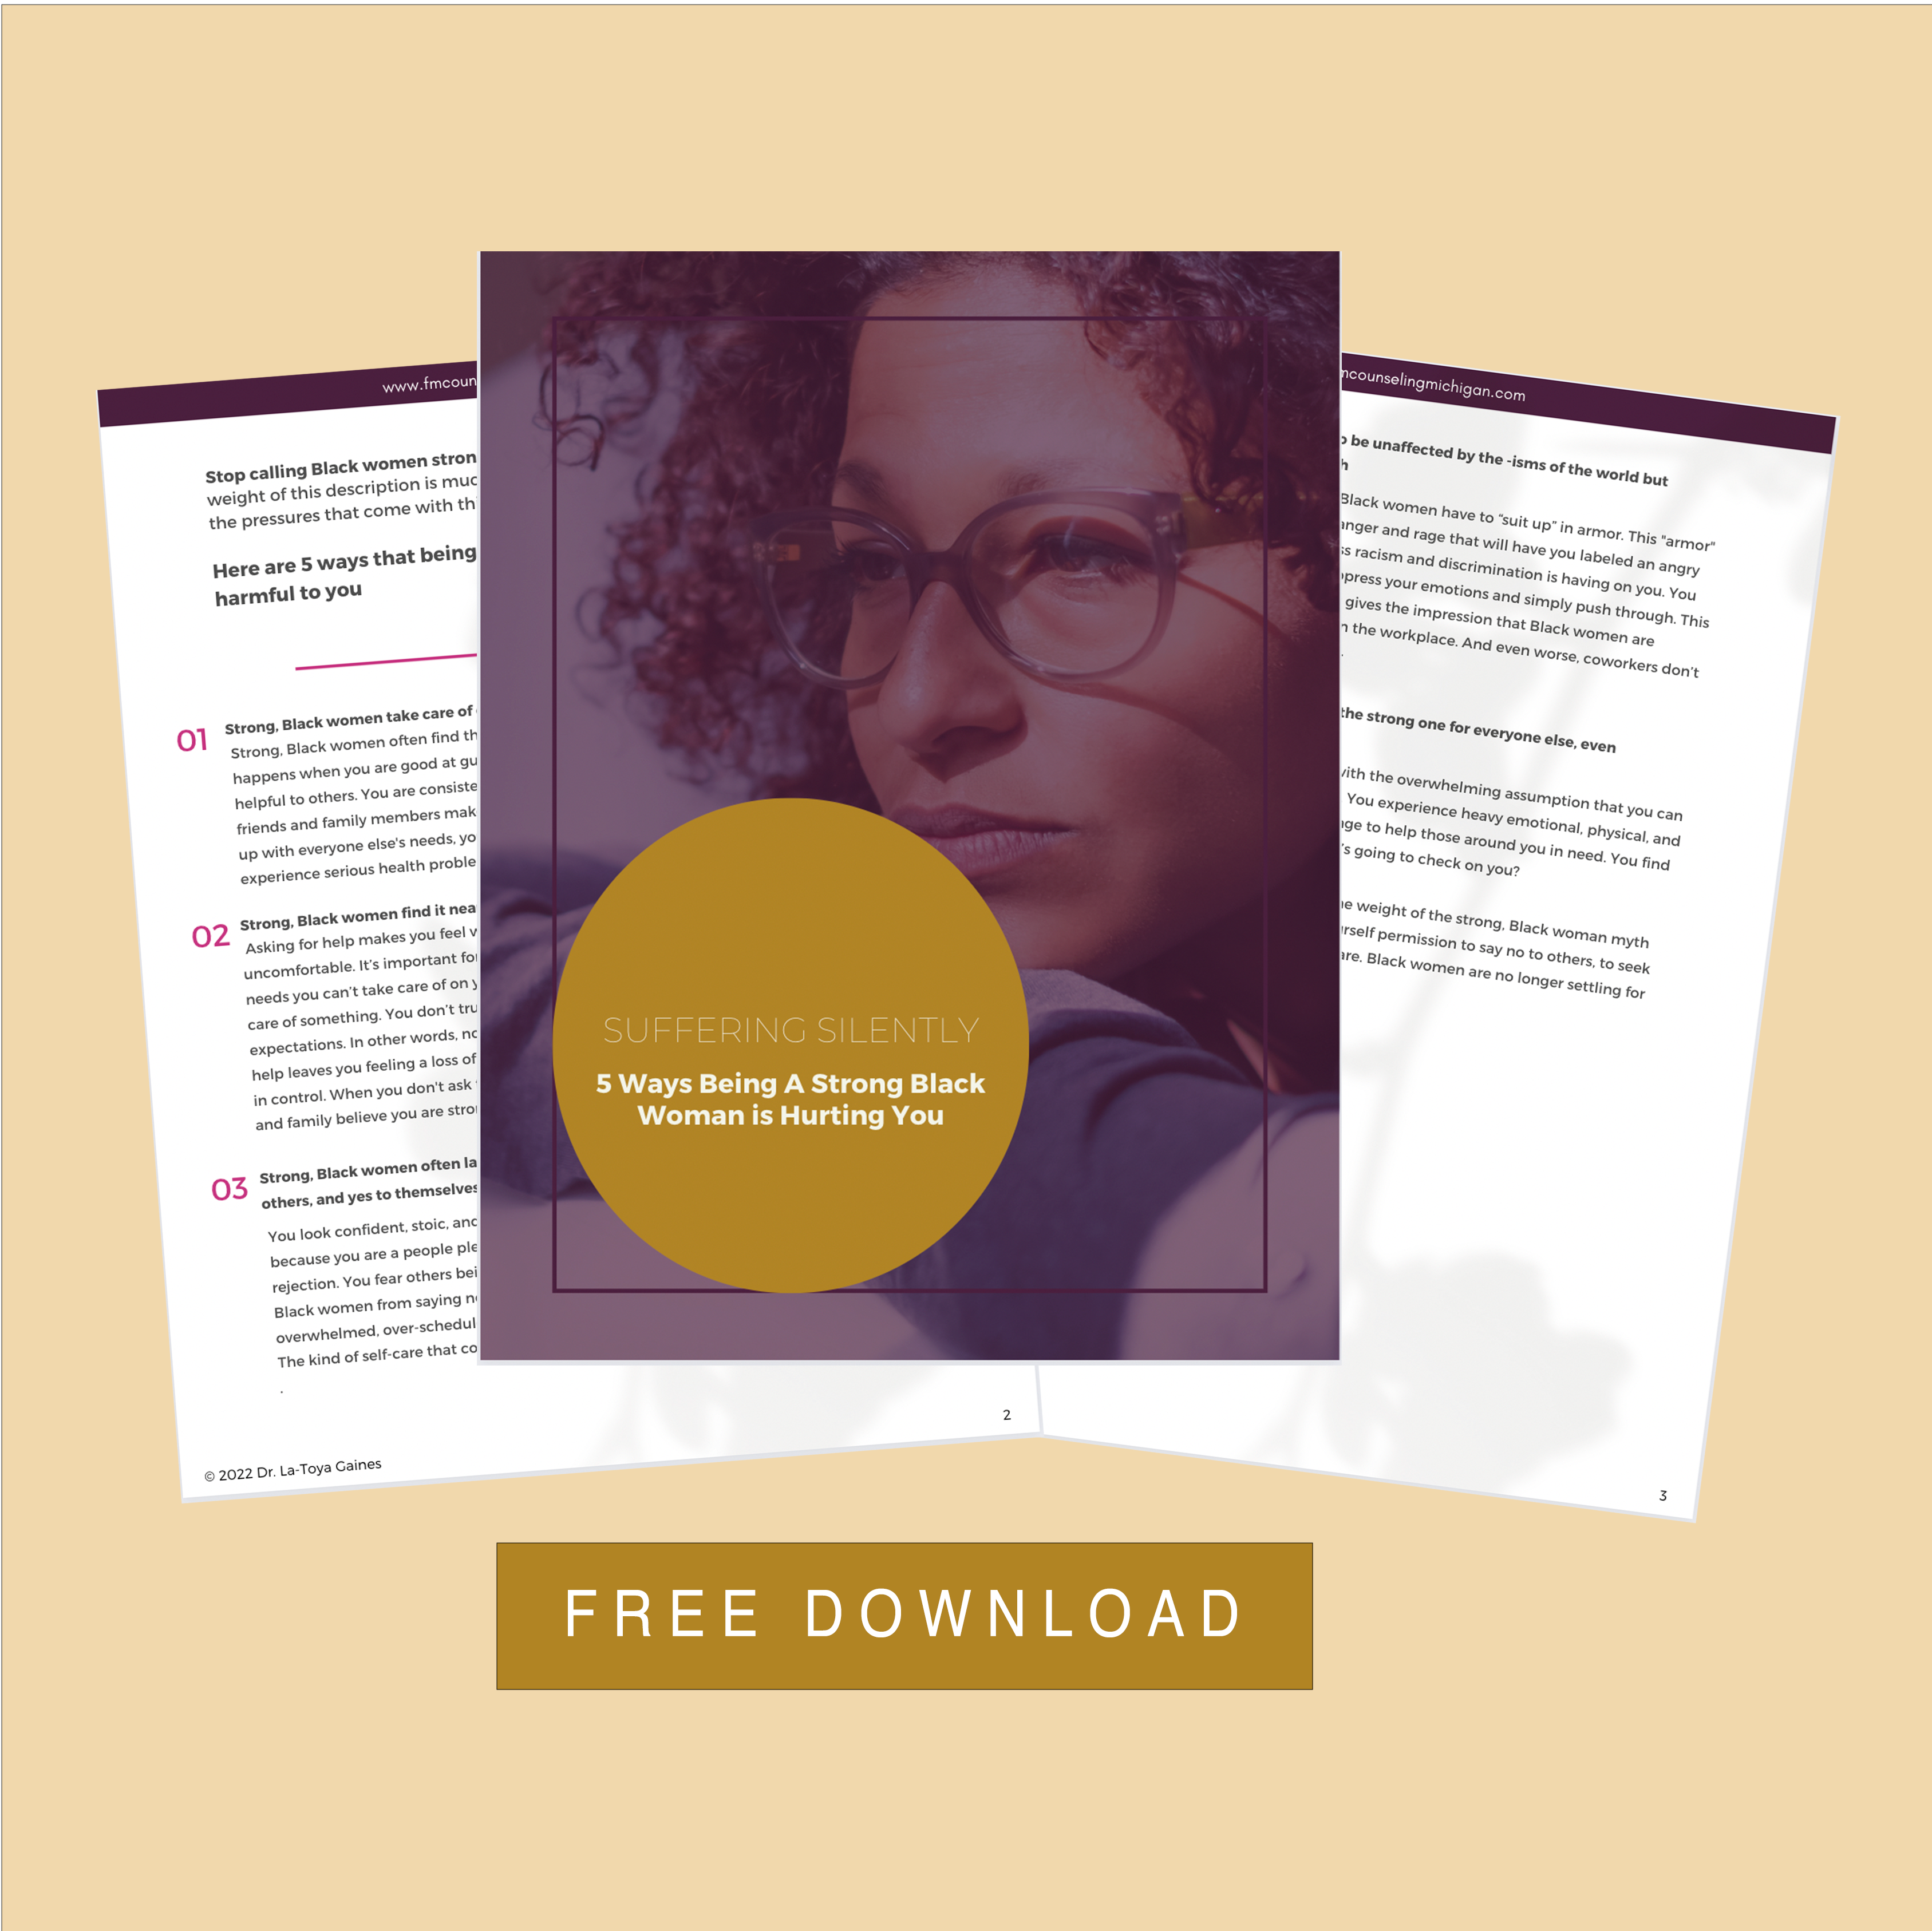 [free guide] 5 ways being a strong black woman is hurting you